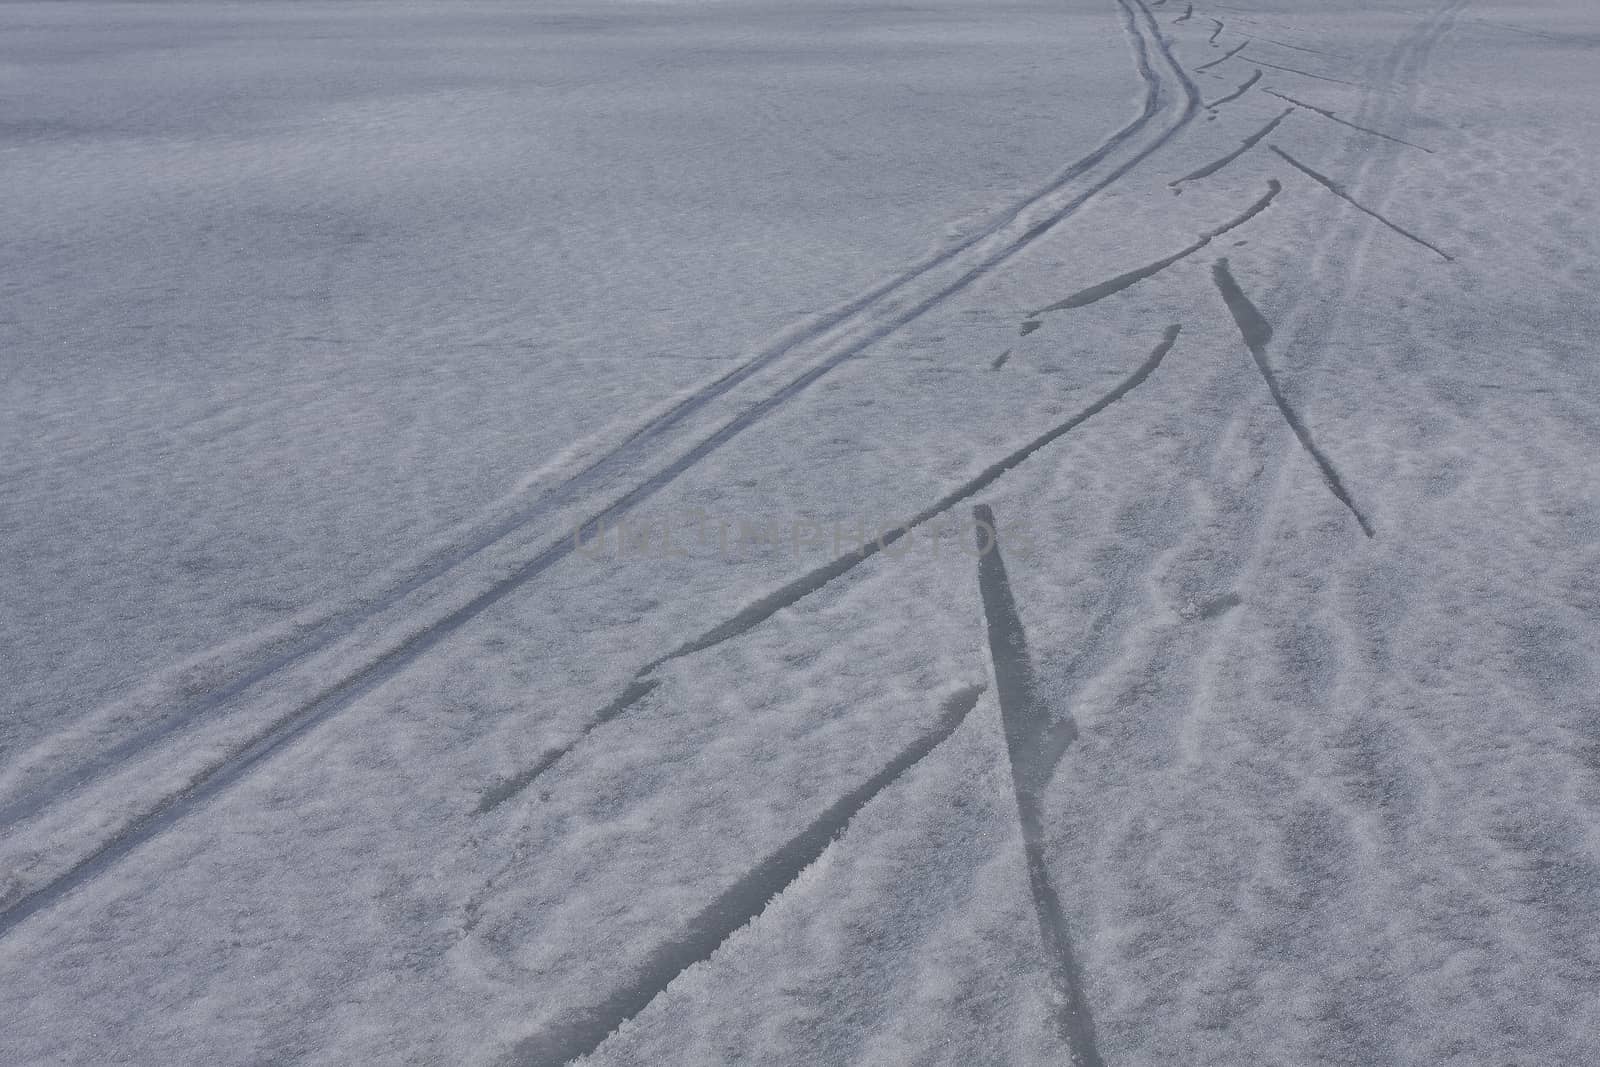 Footprints in the snow of a frozen lake, ski.